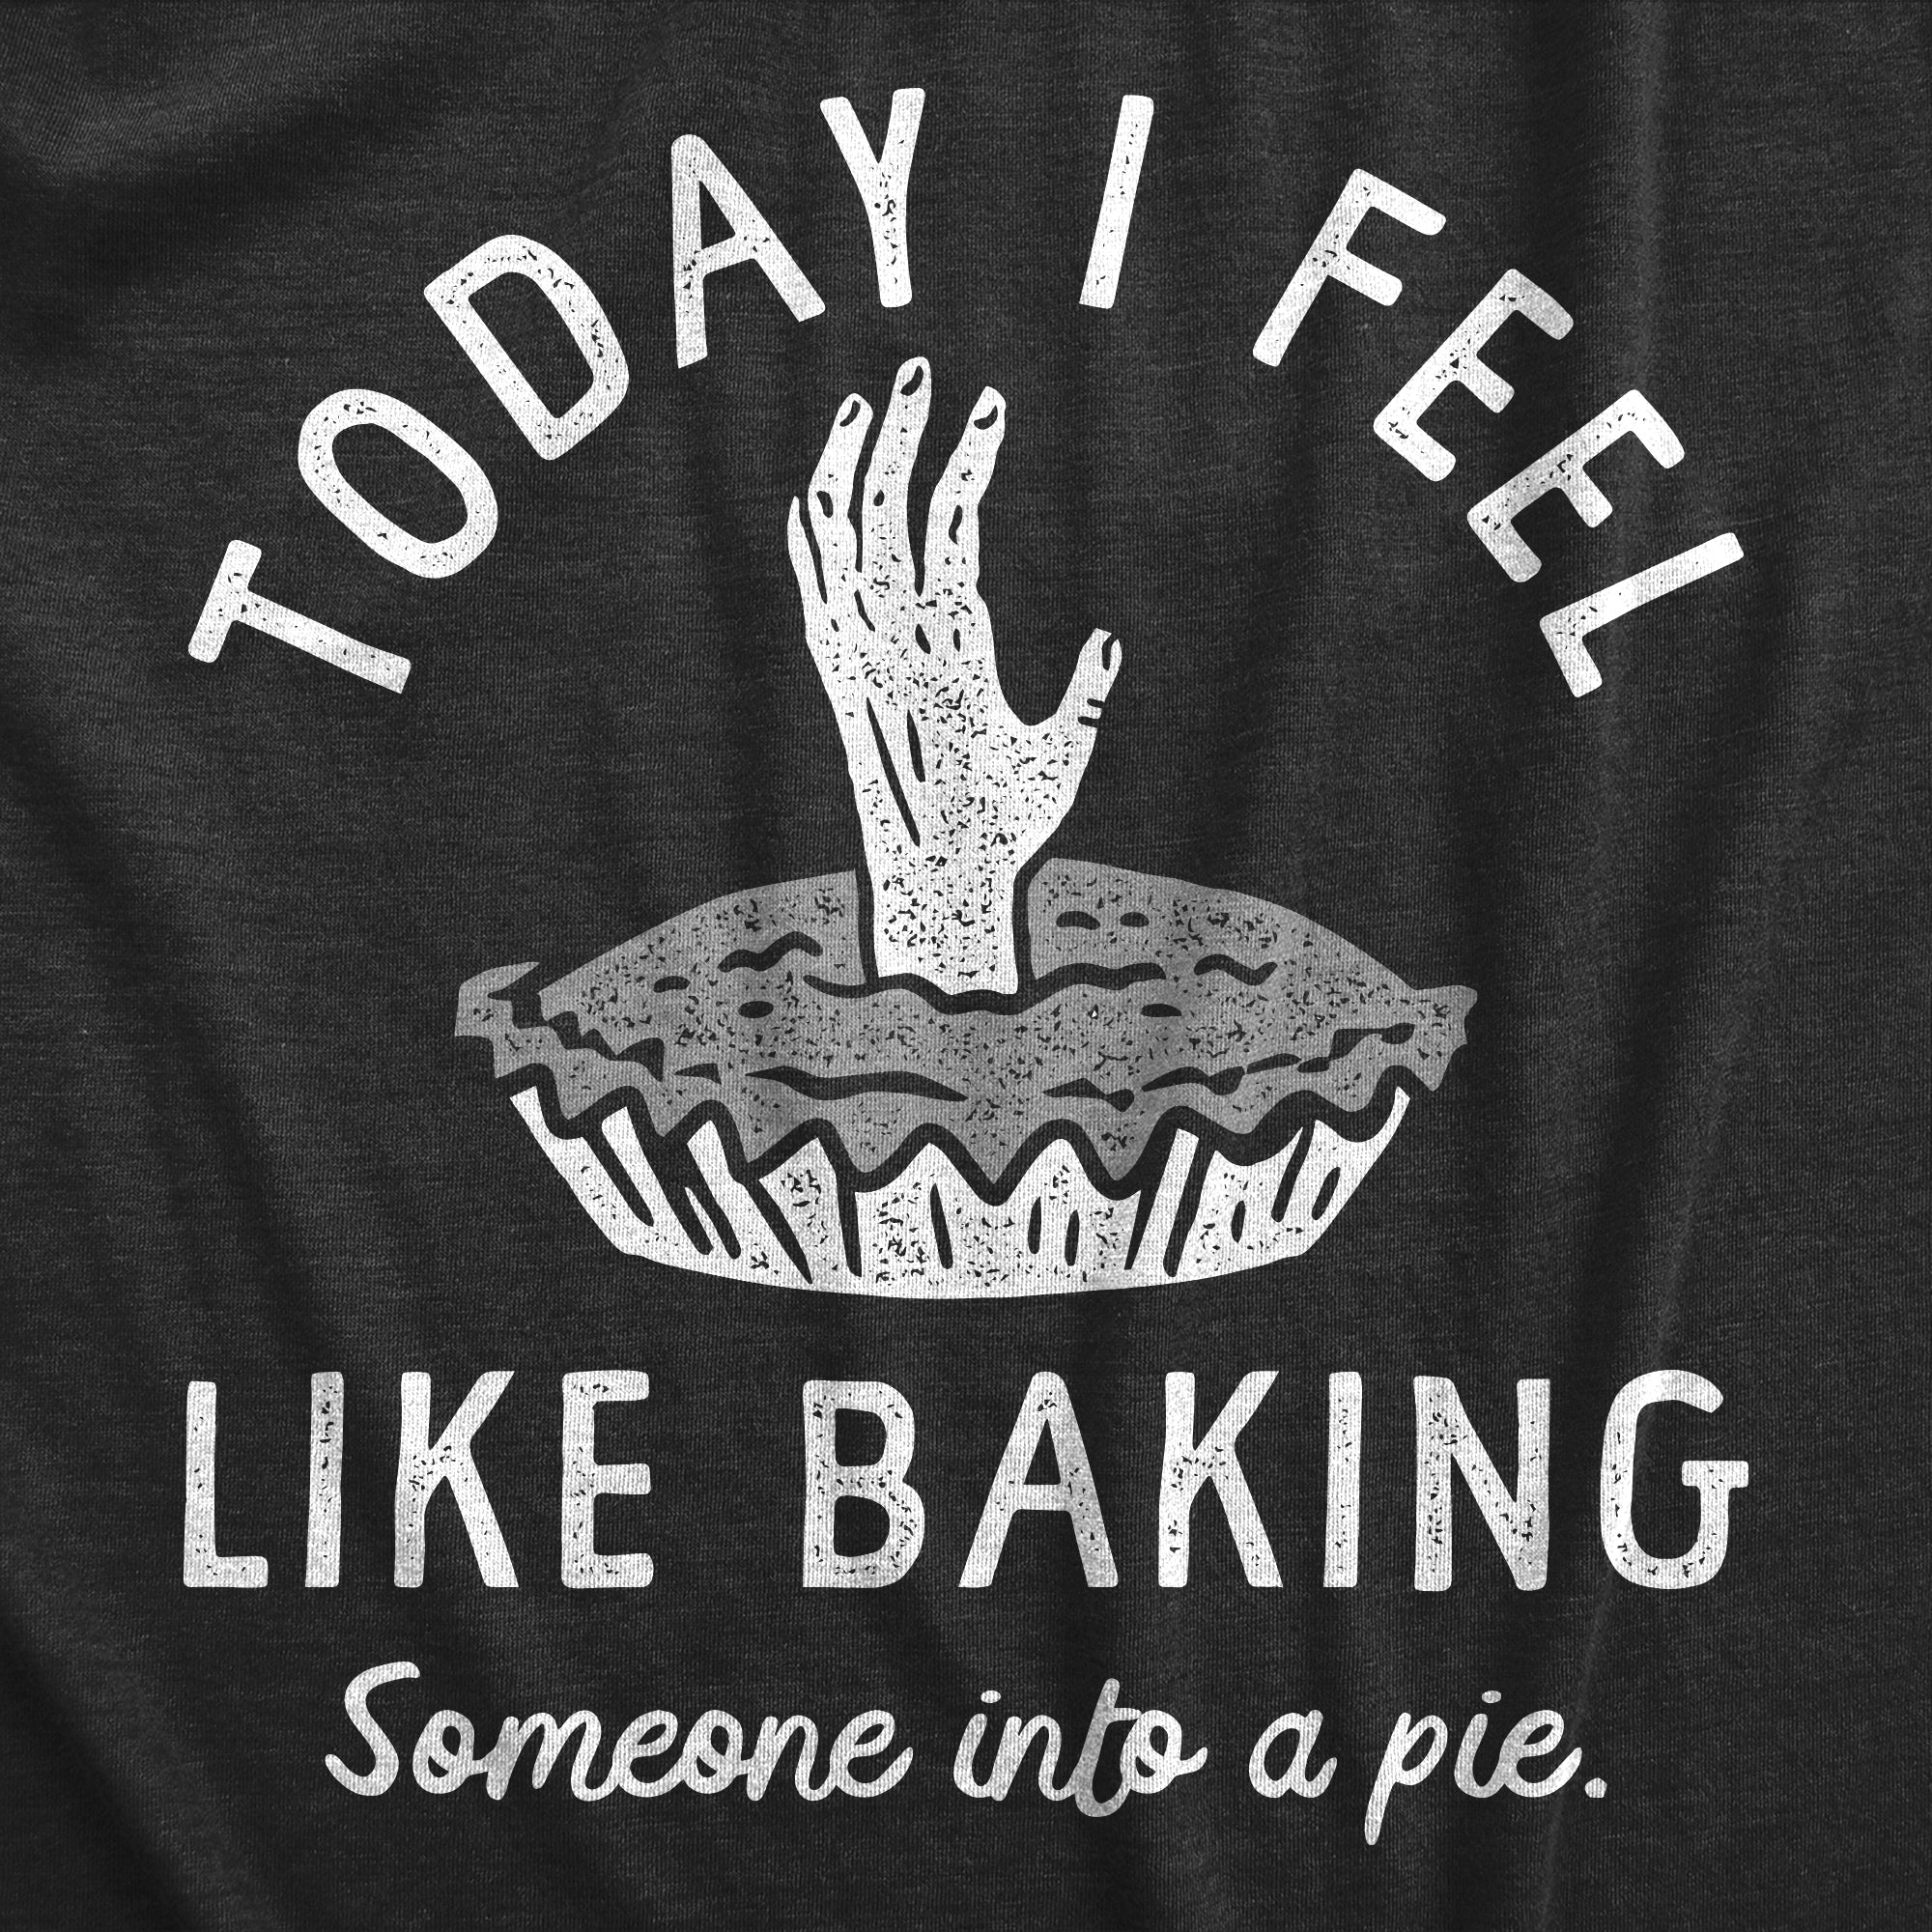 Funny Heather Black Today I Feel Like Baking Someone Into A Pie Womens T Shirt Nerdy food Tee